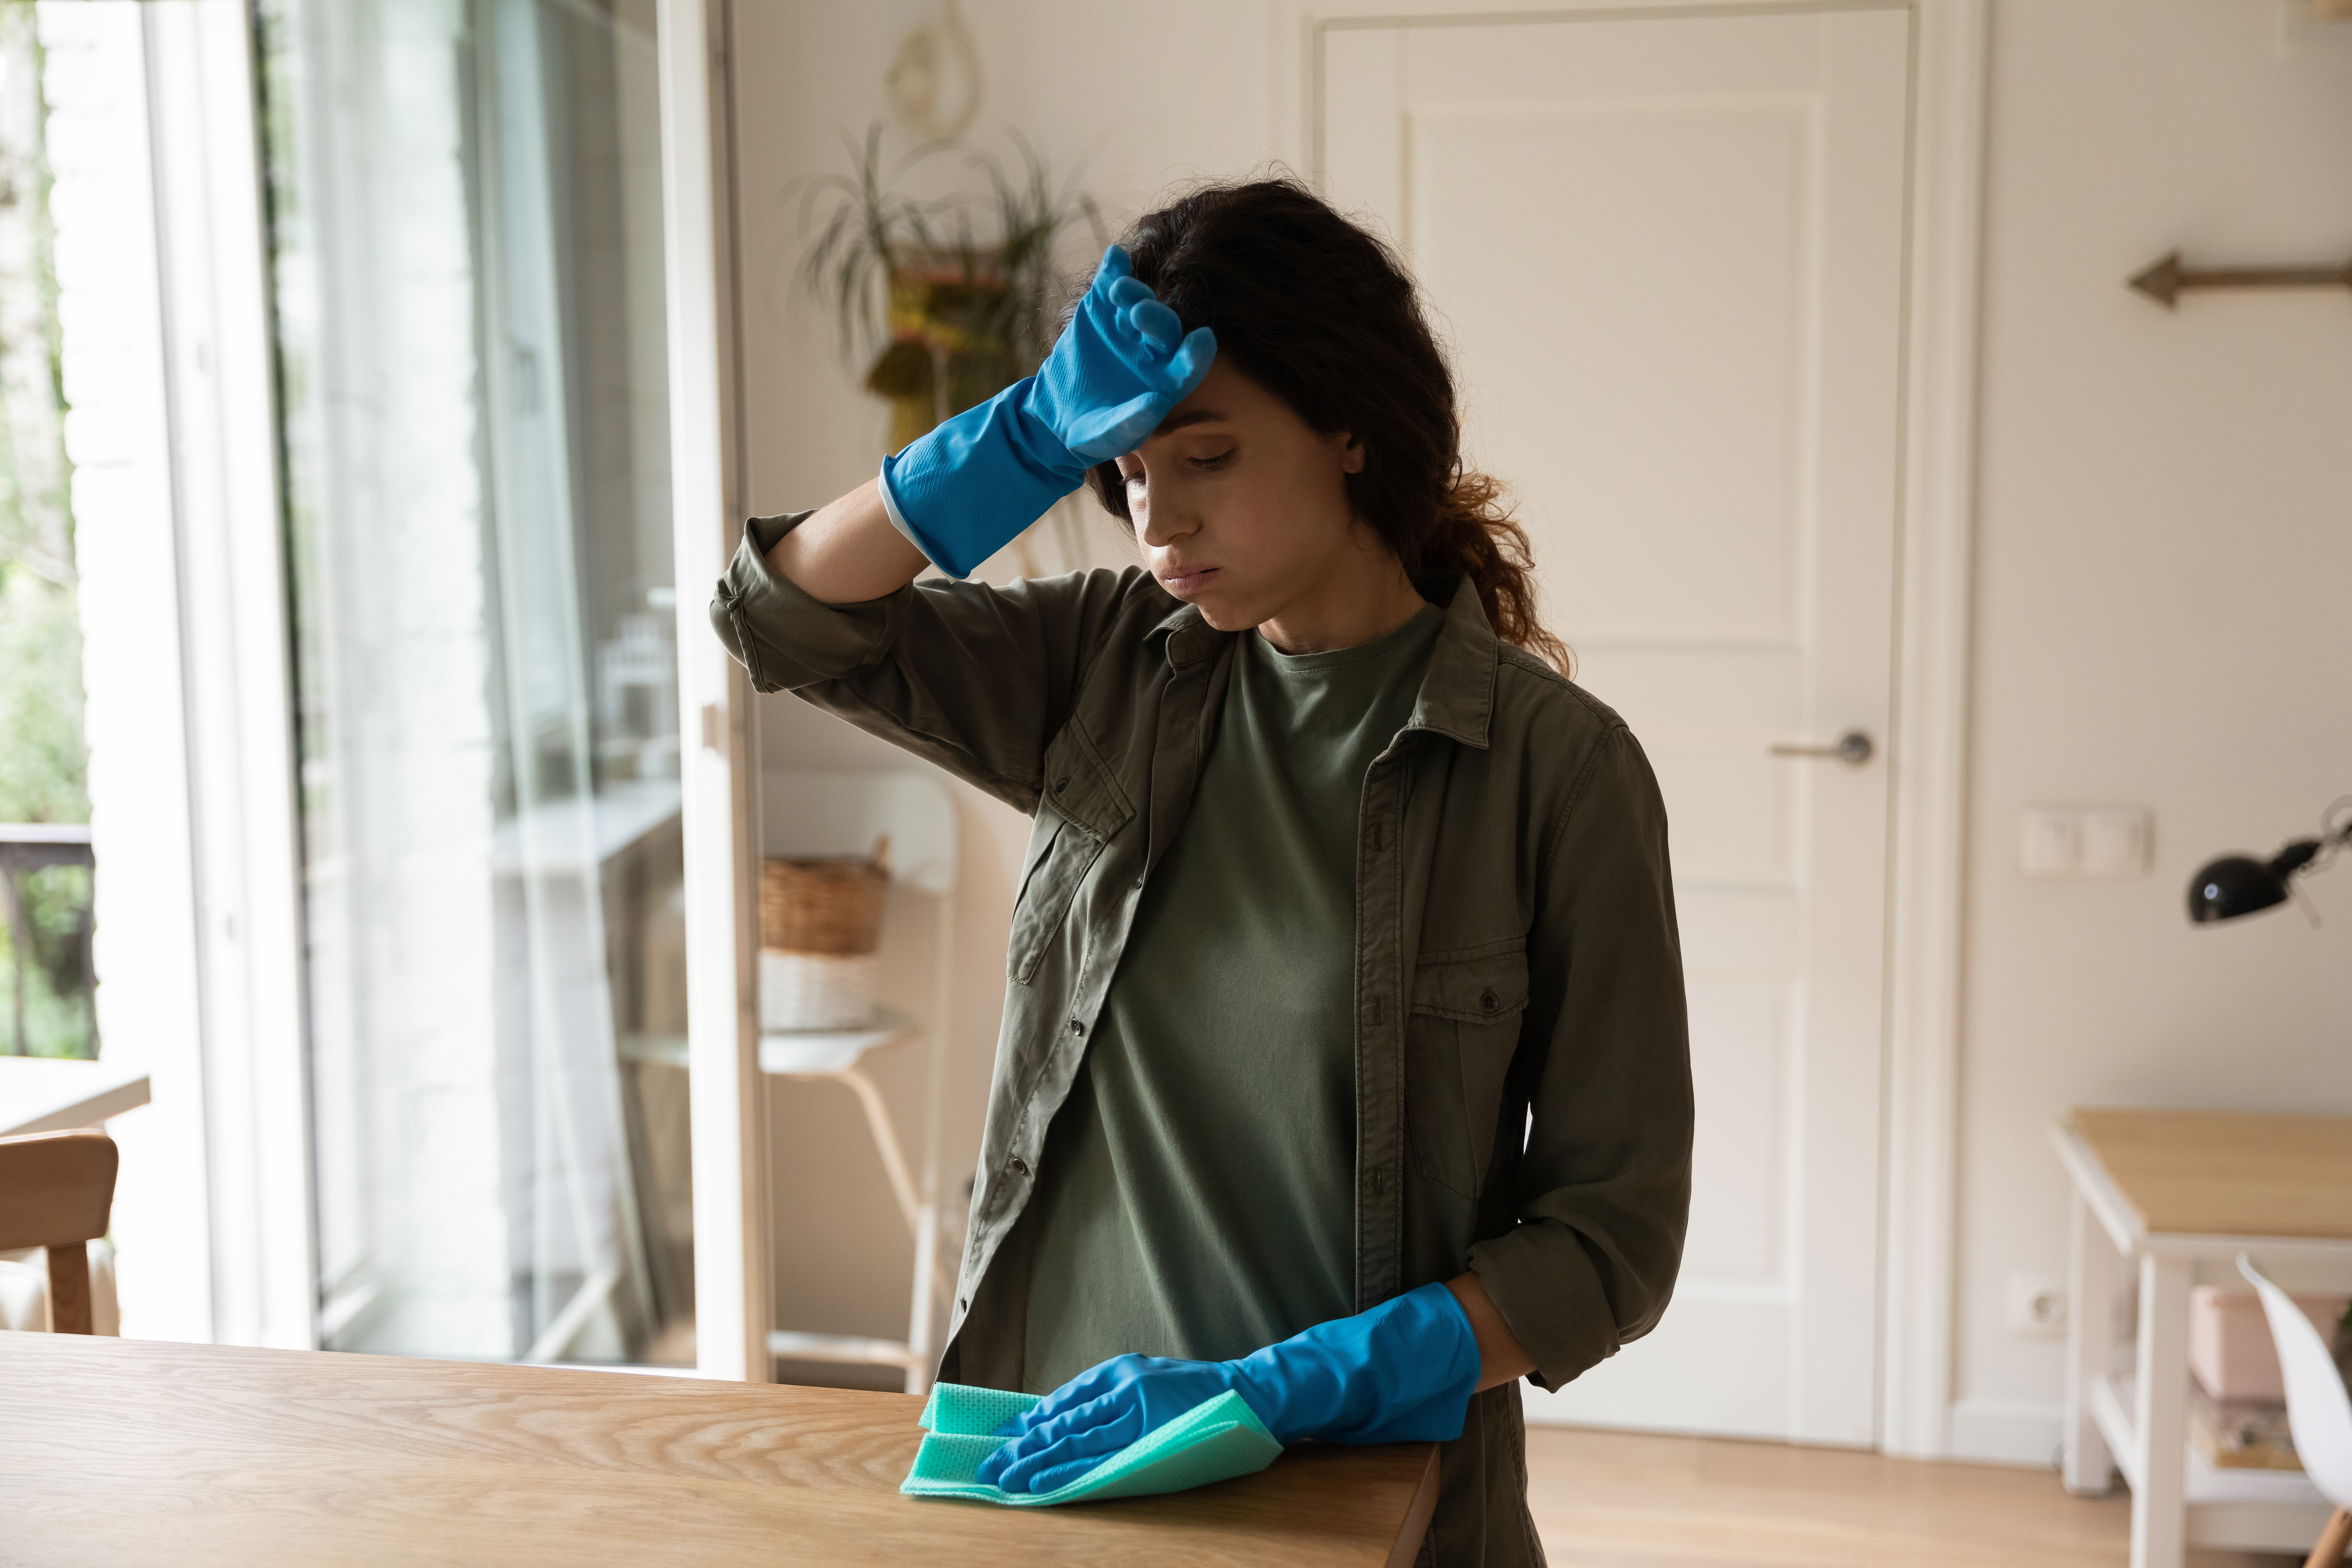 Exhausted millennial housewife in blue latex gloves wipe sweat from brow. | Source: Shutterstock